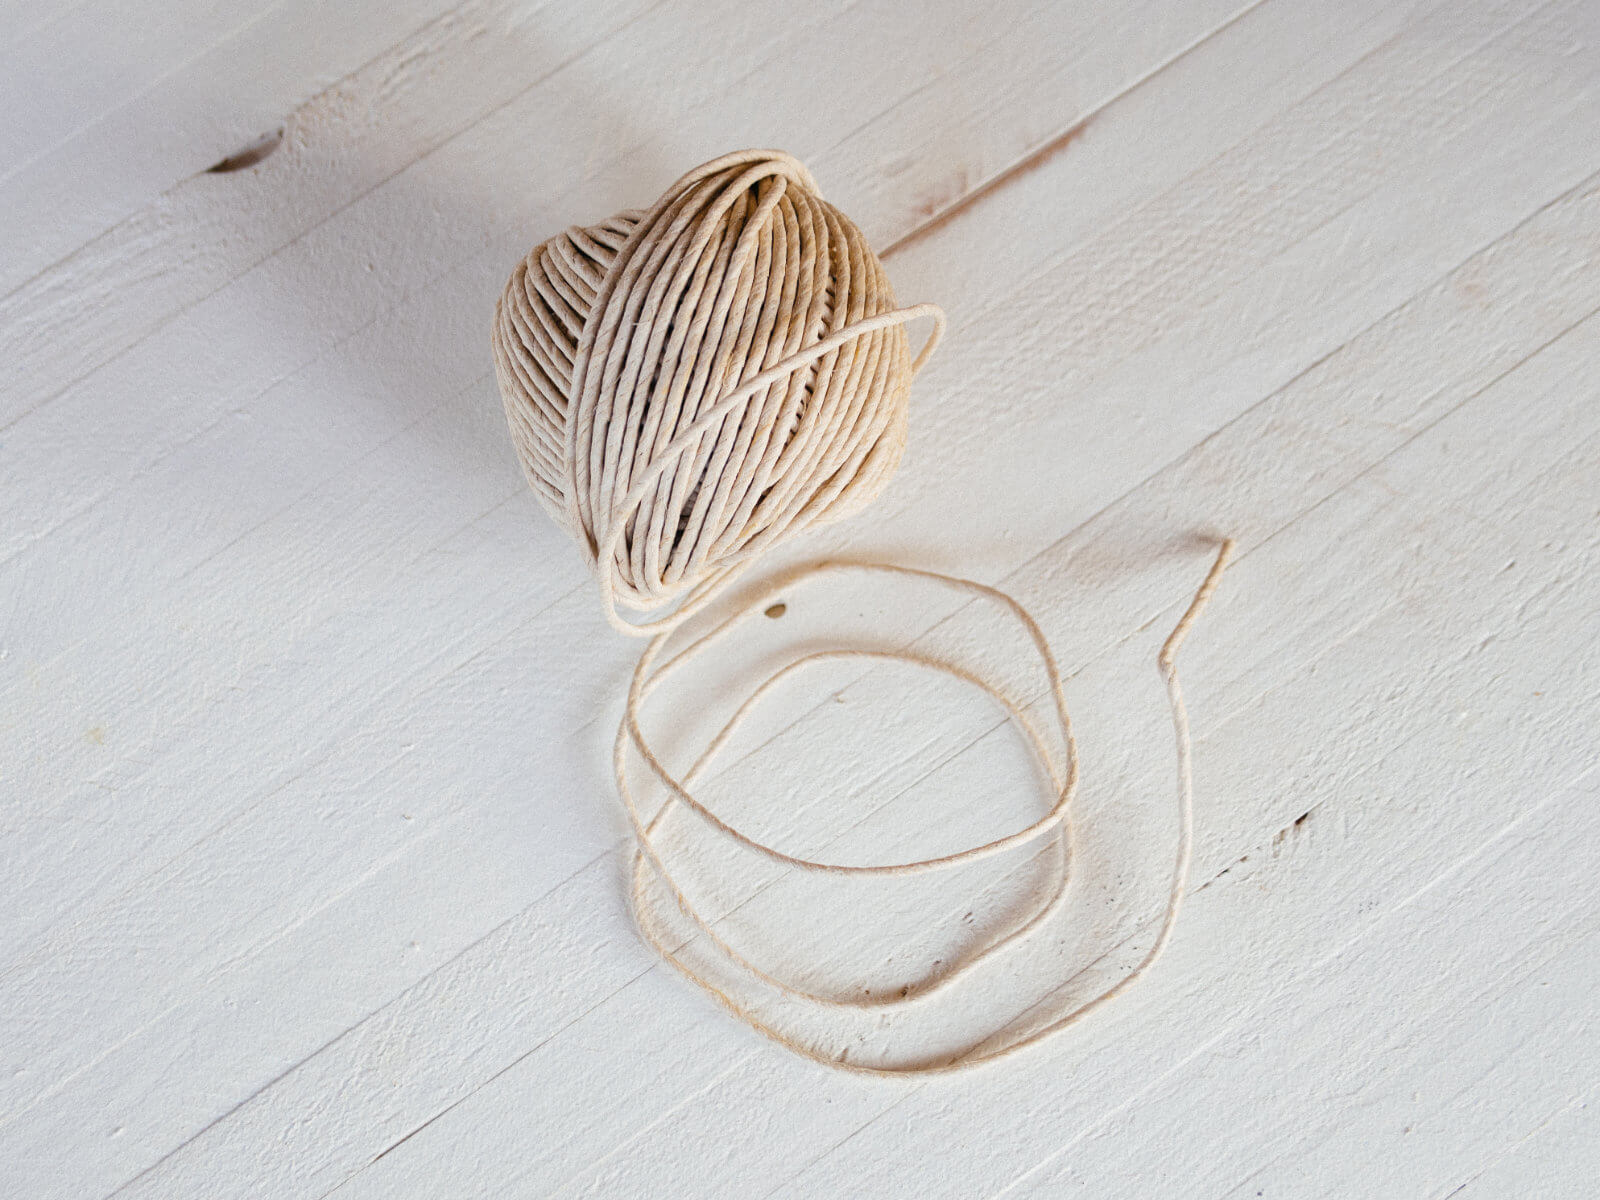 Garden twine is an essential tool for every gardener